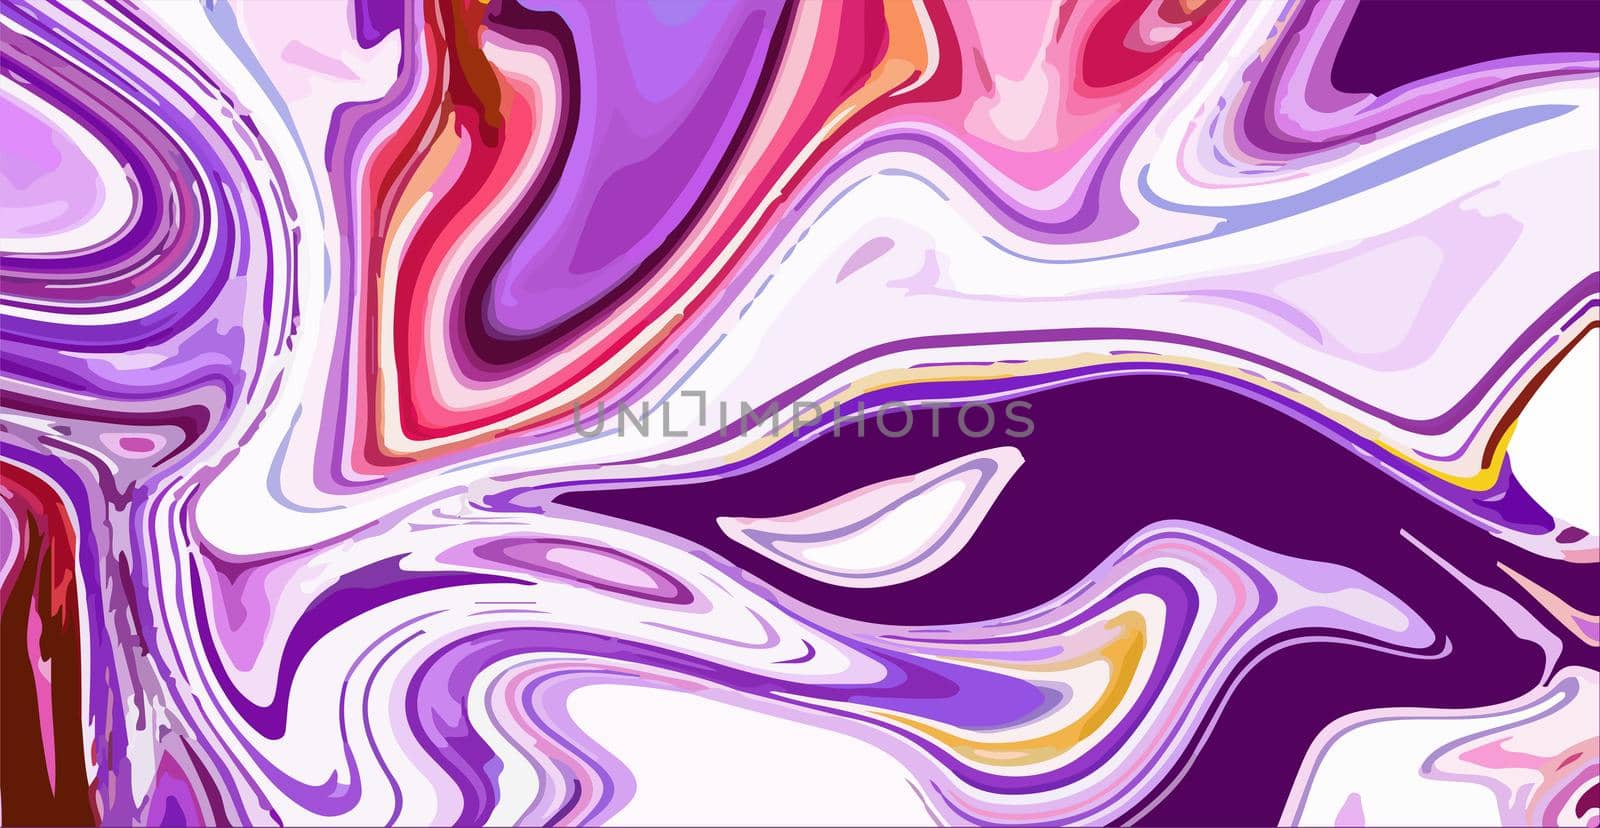 Background in liquid style. Liquid design with abstract elements. Applicable for design covers, presentation, invitation, flyers, annual reports, posters and business cards.